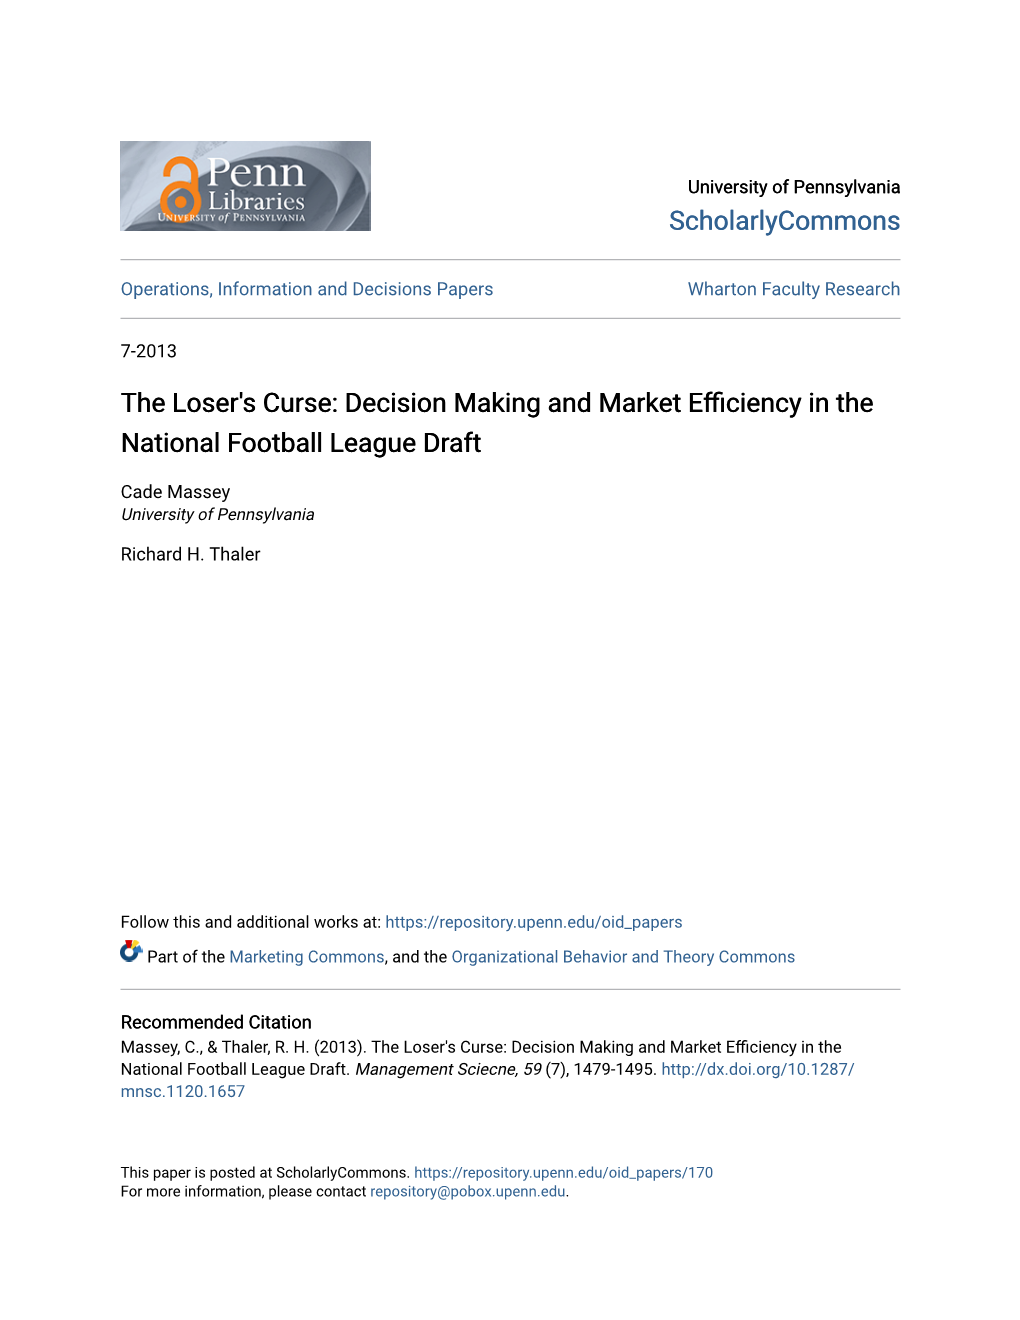 The Loser's Curse: Decision Making and Market Efficiency in the National Football League Draft